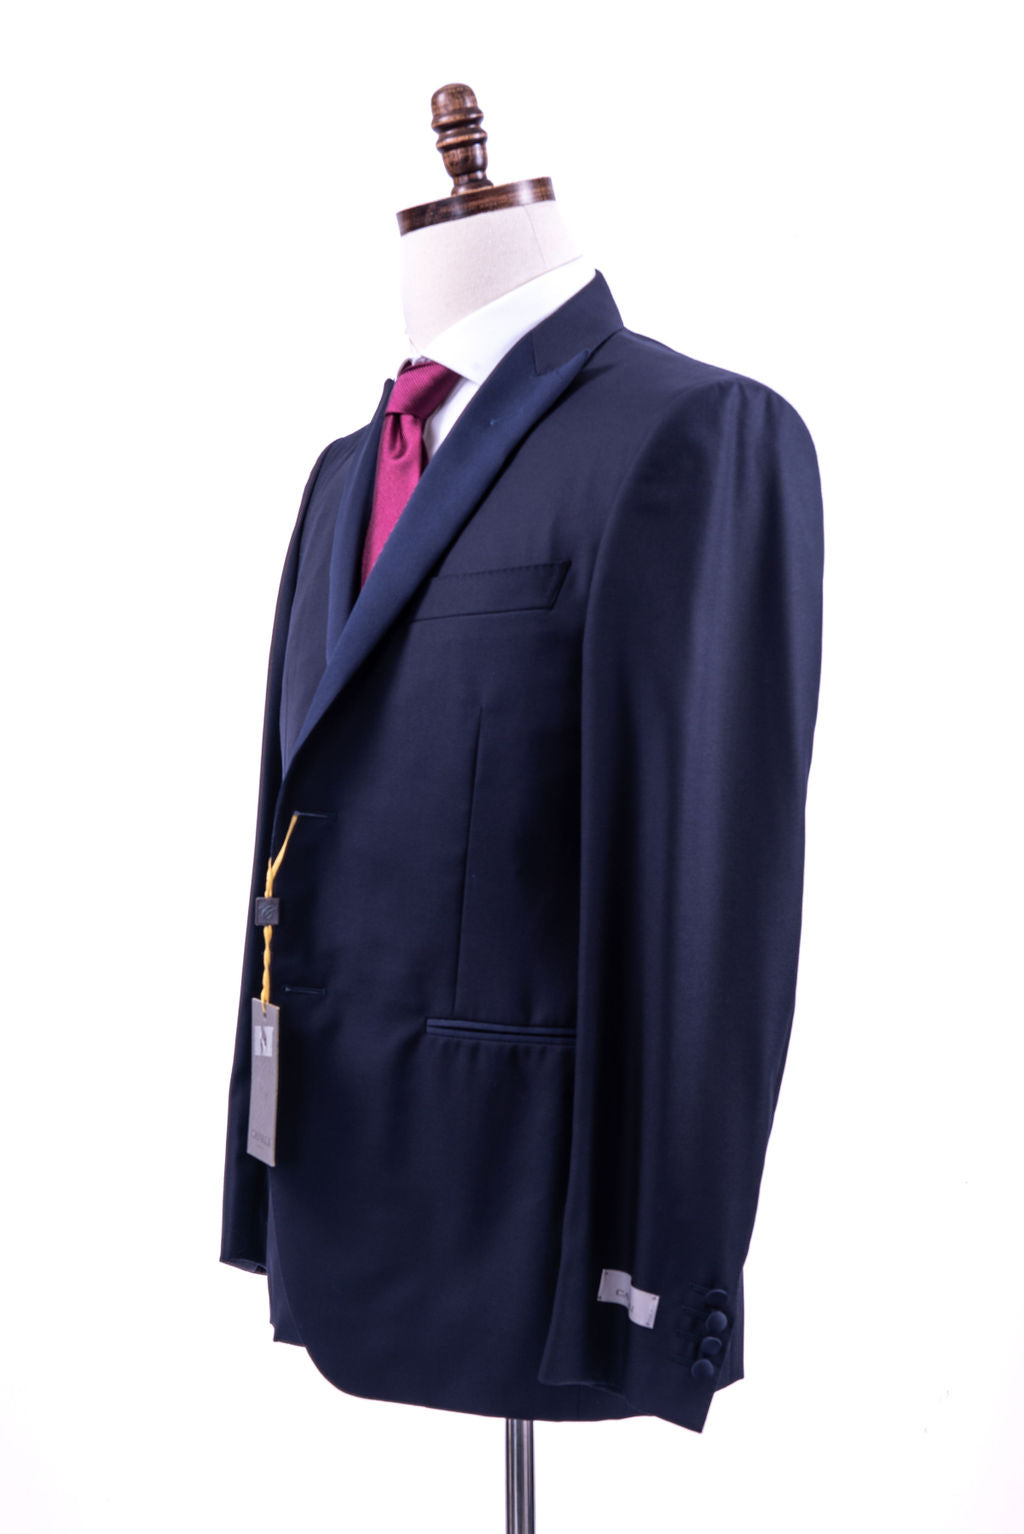 Canali 1934 Mens Solid Navy Blue 42R Drop 8 100% Wool Tuxedo Suit With Satin Lapels